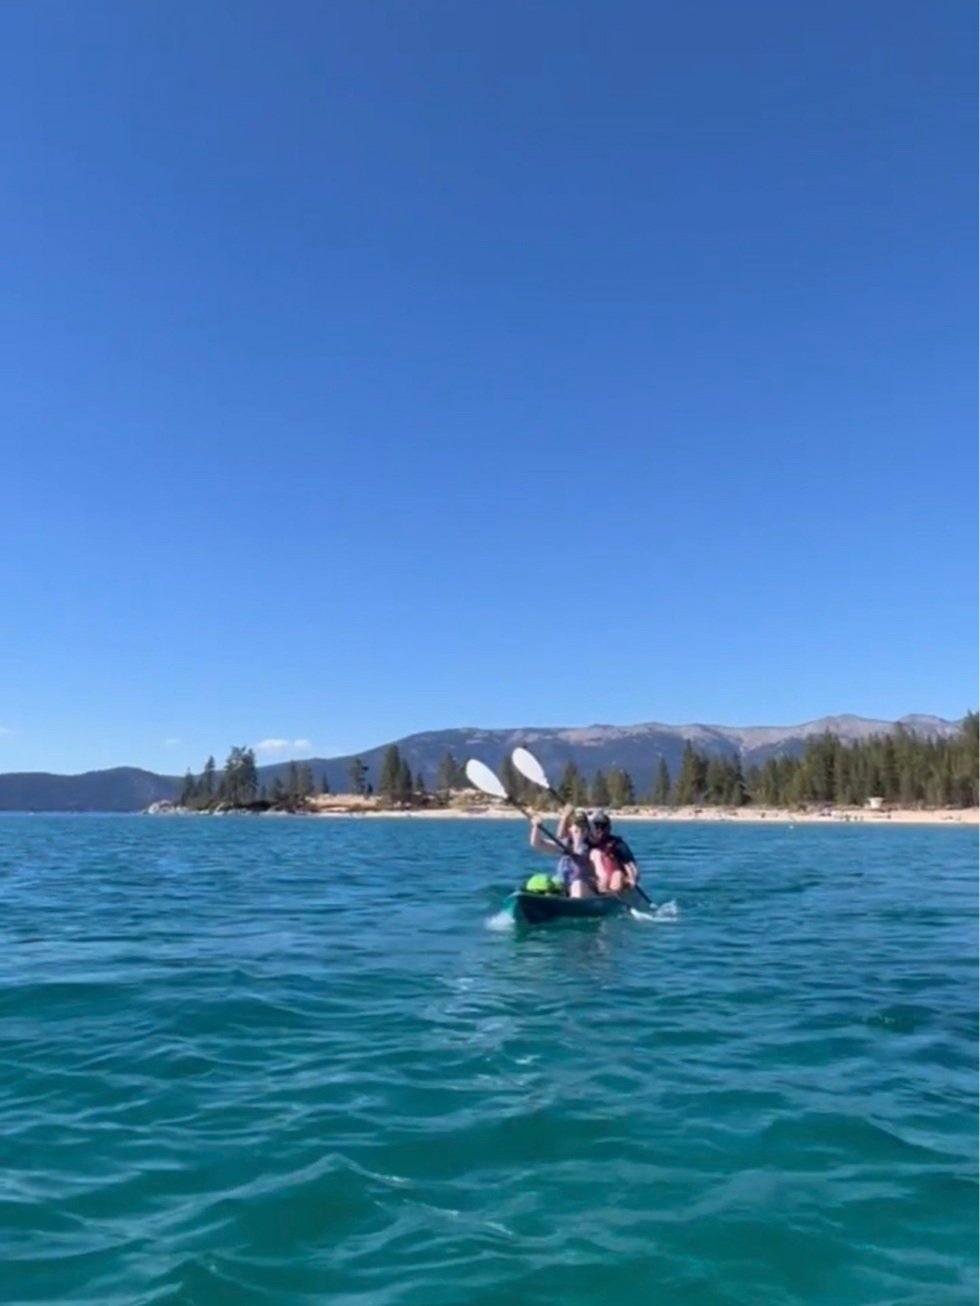 group trip to south lake tahoe, rnr vacation rentals, work from anywhere, remote work, long term rental, where to stay in south lake tahoe, friend trip, large cabins houses vacation rental, kayaking